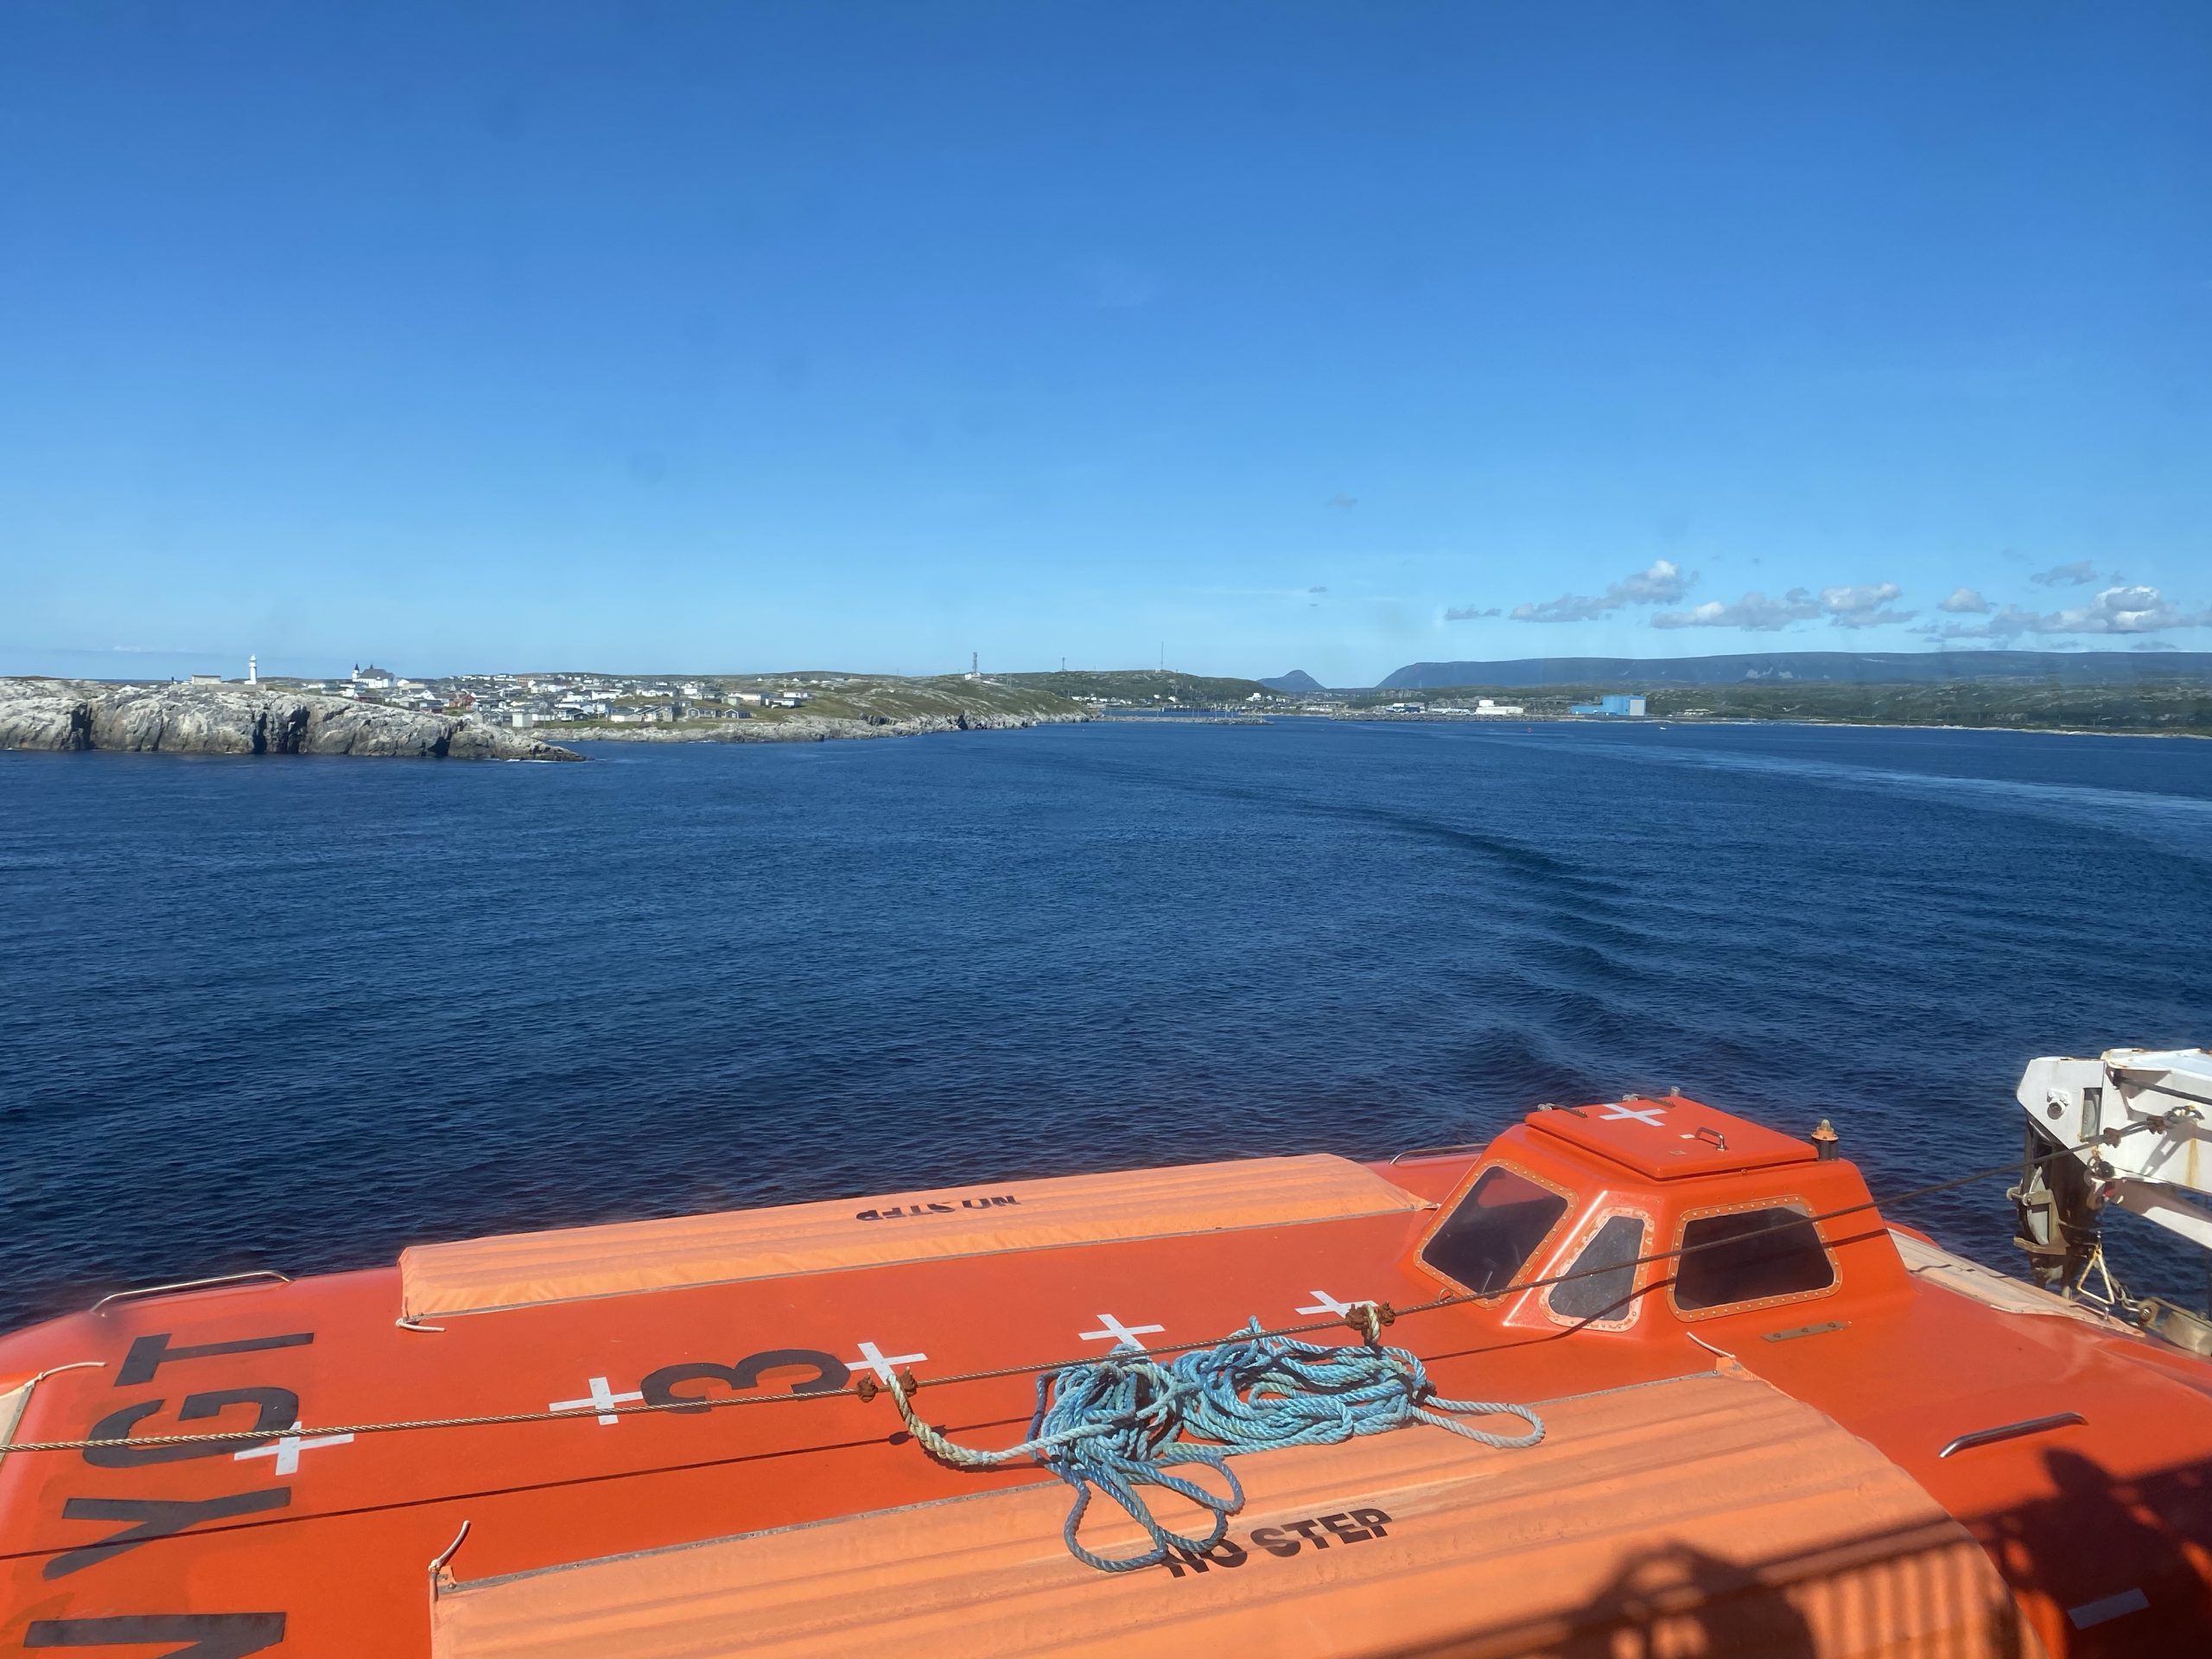 A look back into Port aux Basque harbor as the MV Highlanders ferry turns to sail from Newfoundland to Nova Scotia.